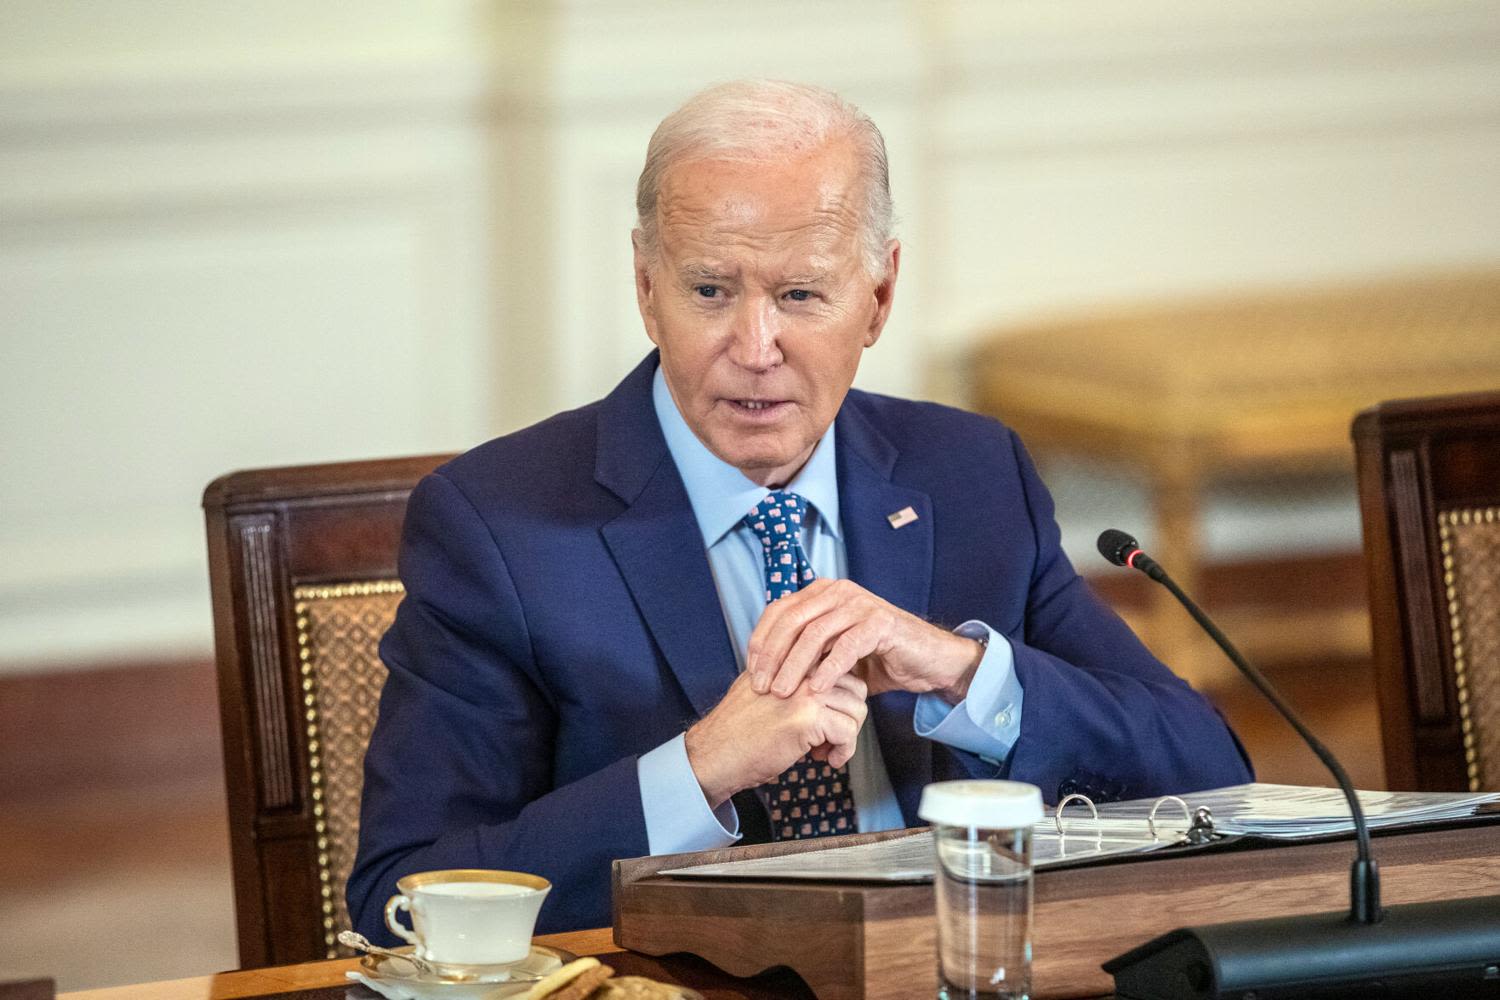 Young voters reject Biden and Democrats need a fresh nominee